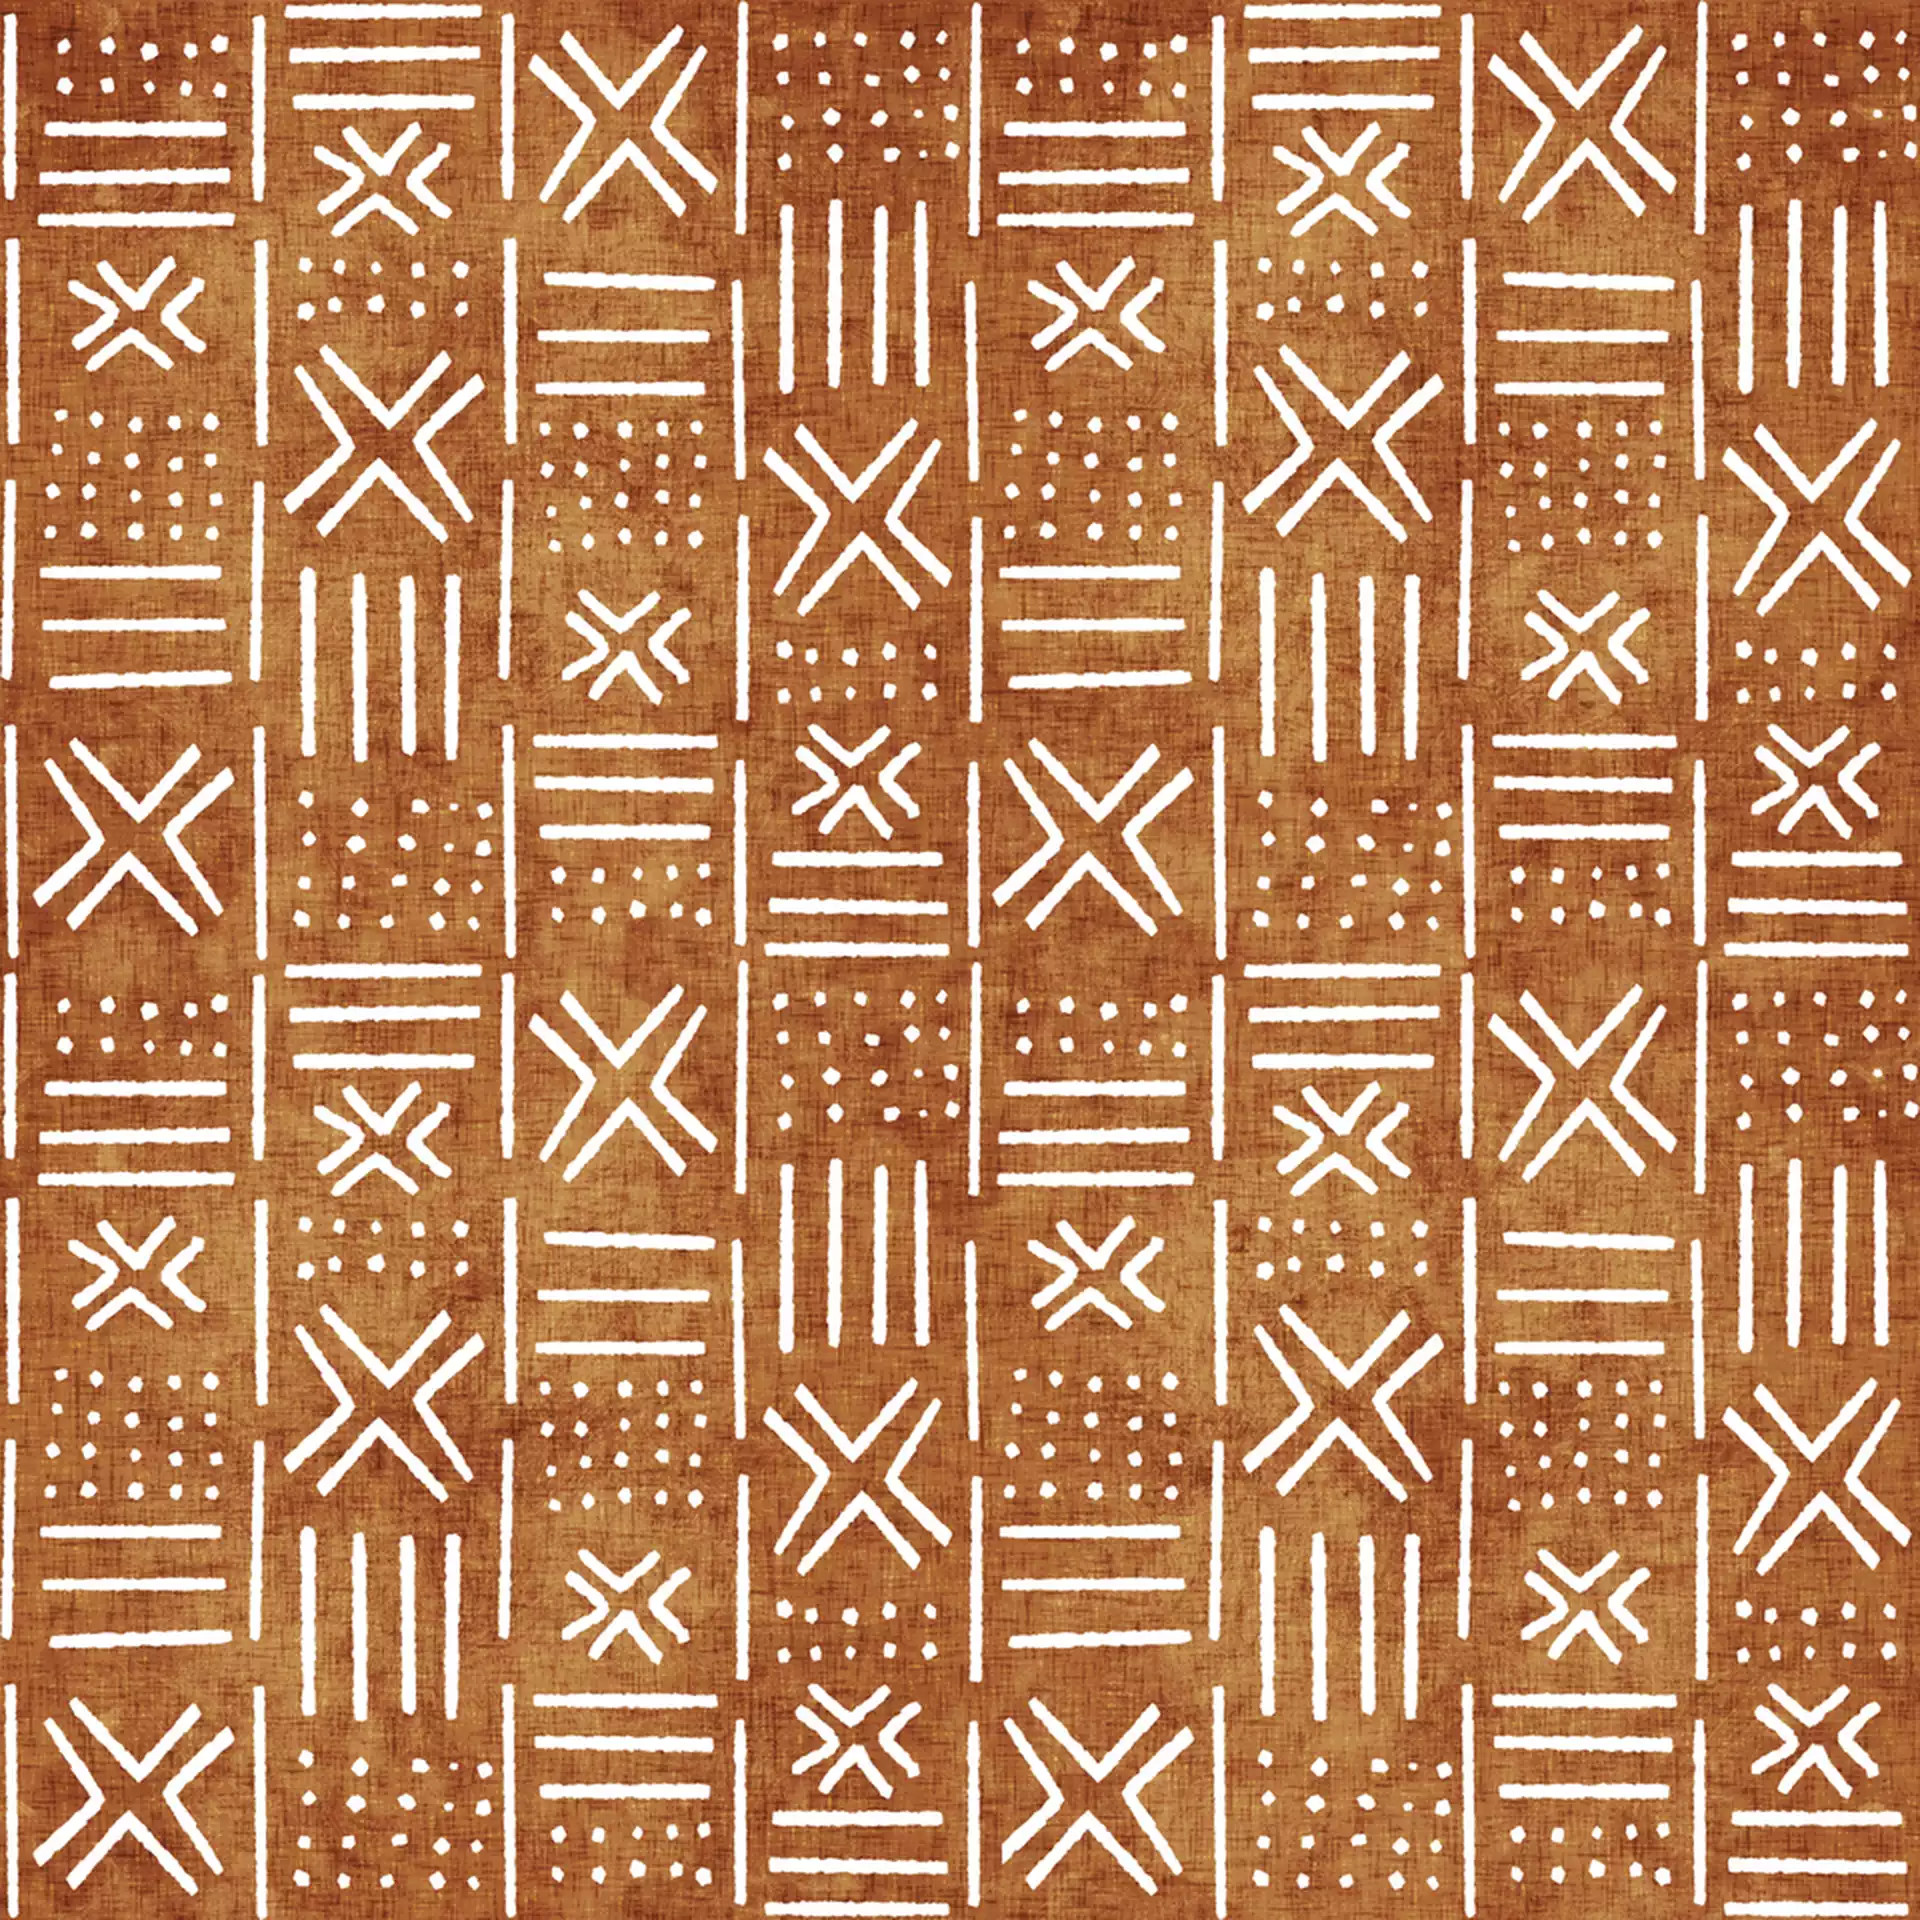 Mudcloth - Tribal Decor, Mud Cloth Decor, Mud Cloth Bedding, Mudcloth Curtains, Rust, Rust Color, Trendy Decor Framed Art Print by Charlottewinter - Conservation Natural - X-Small-10x12